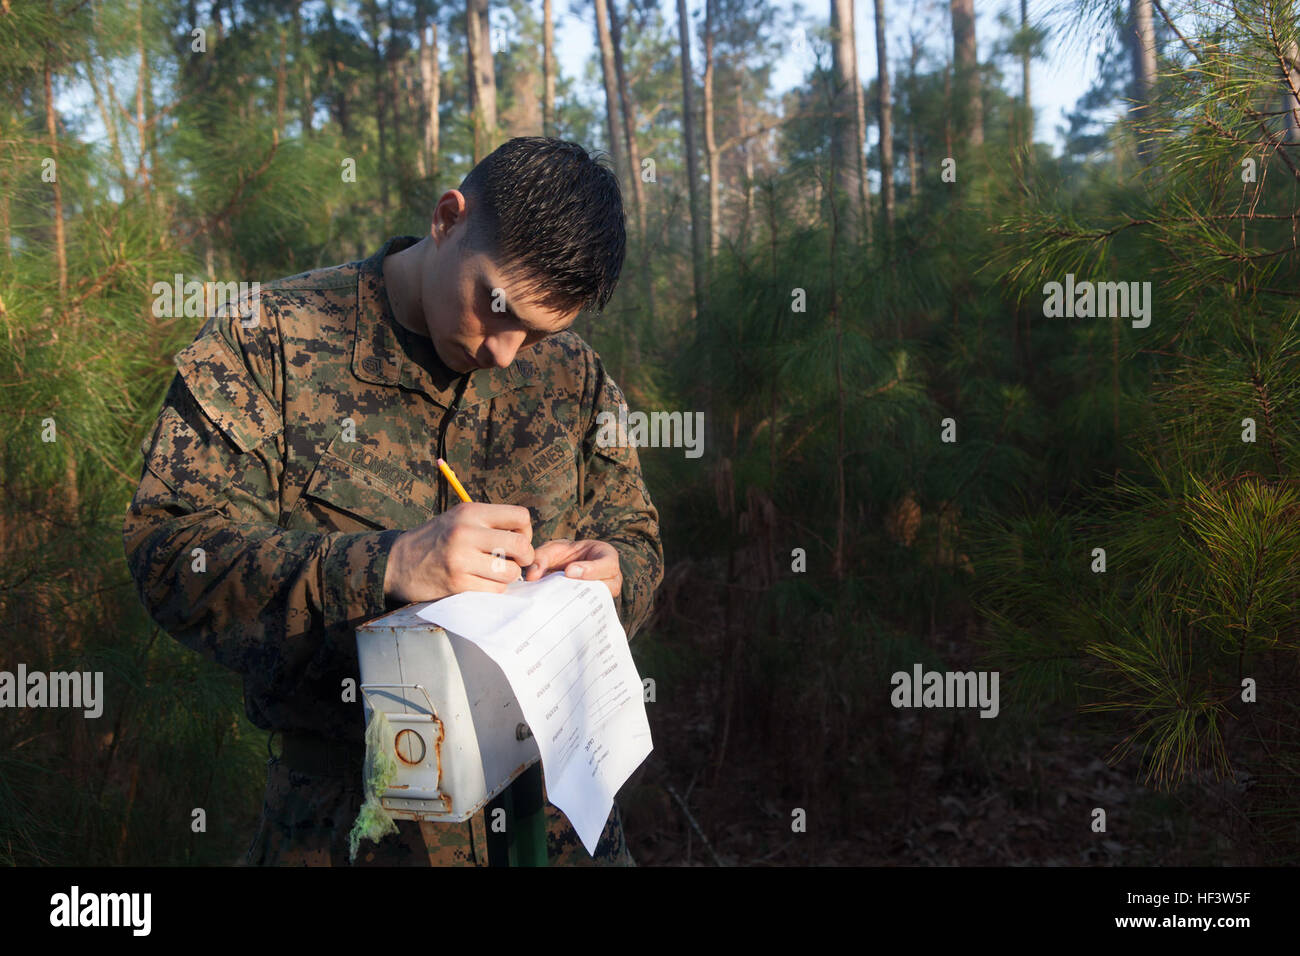 U.S. Marine Staff Sgt. Aldo Gongora, a Combat Instructor with the Marine Corps Combat Instructor School, School of Infantry-East, plots a map point during the land navigation portion of the Combat Instructor Stakes Competition on Camp Lejeune, N.C., March 16, 2015. The School of Infantry-East hosted the Combat Instructor Stakes, which is a grueling 30-hour competition that pits two man teams against each other, competing in physical, tactical and knowledge based events while carrying a combat load and moving over 50 kilometers on foot. (U.S. Marine Corps photo by Lance Cpl. Jose Villalobosroch Stock Photo